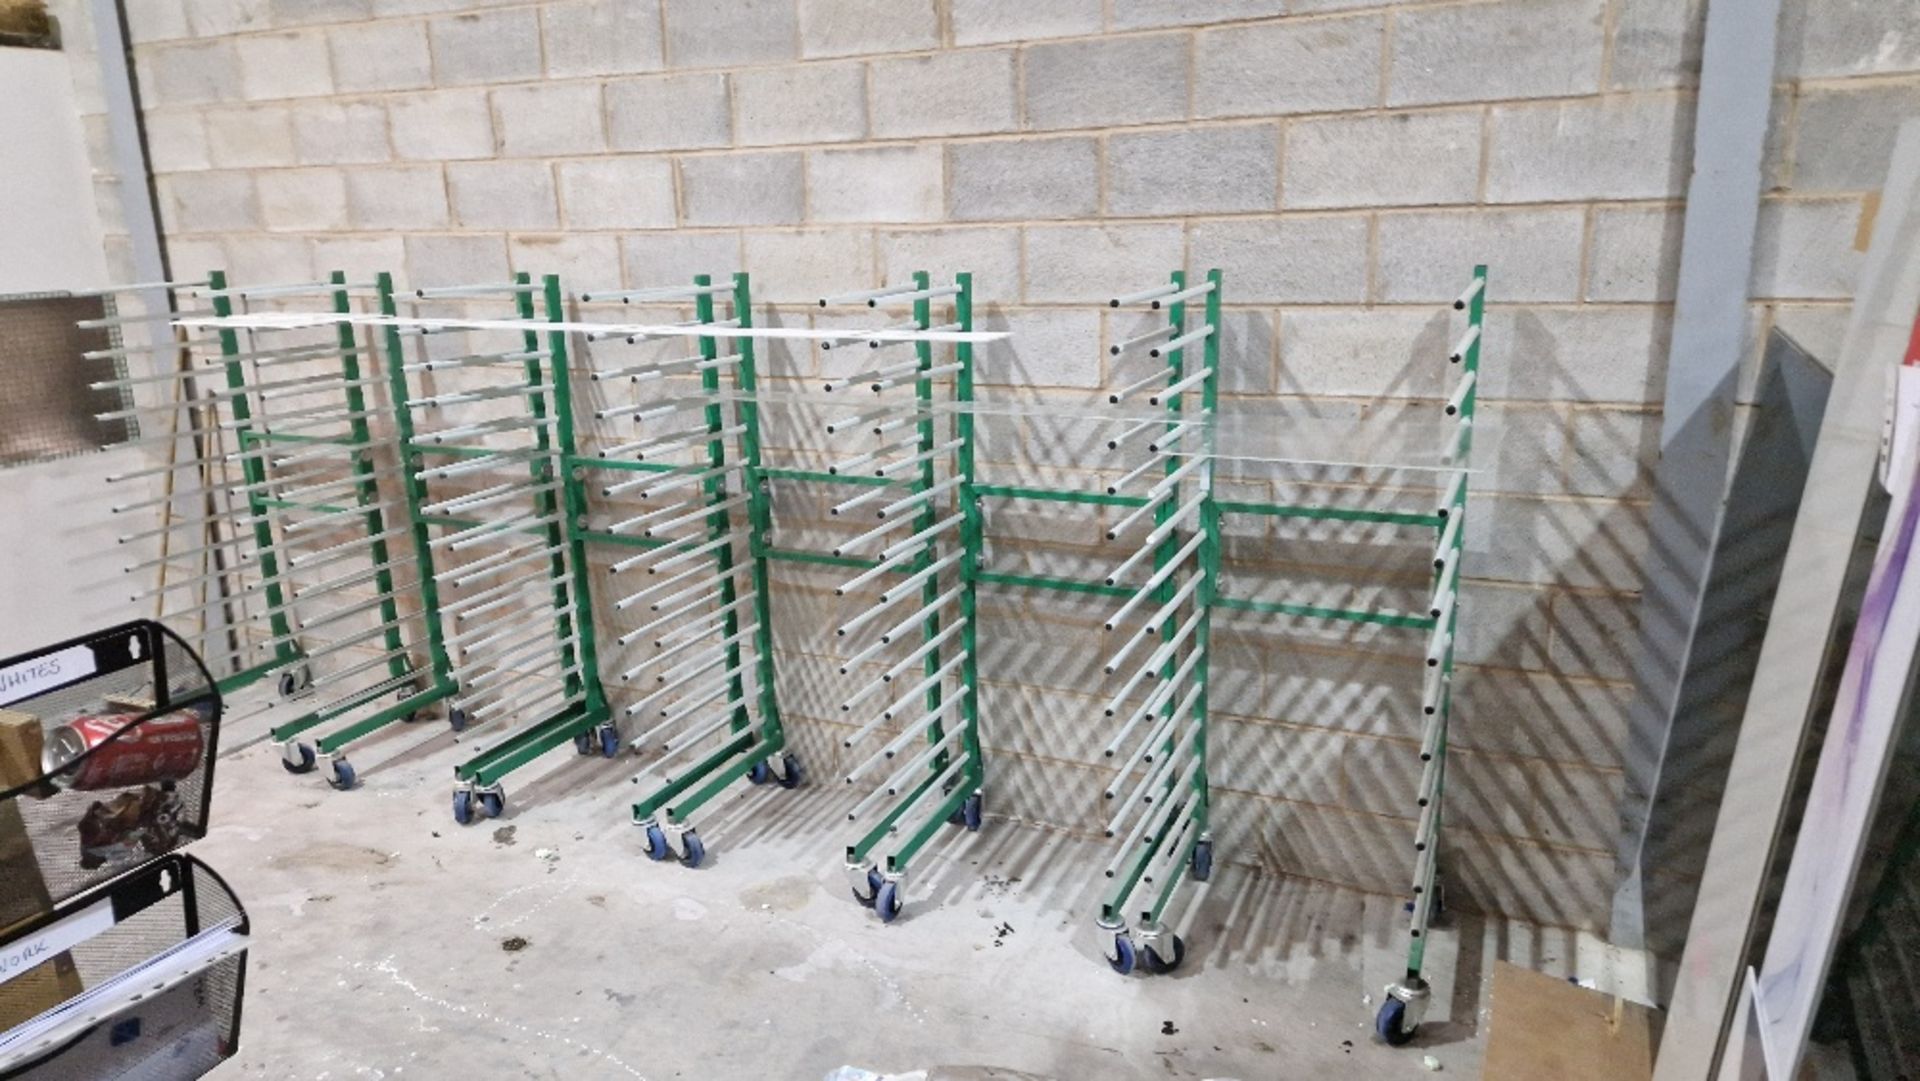 6 X 14 SHELF MOBILE DRYING RACKS (ASSETS LOCATED IN LIVERPOOL. VIEWING STRICLY BY APPT ON 22ND FEB